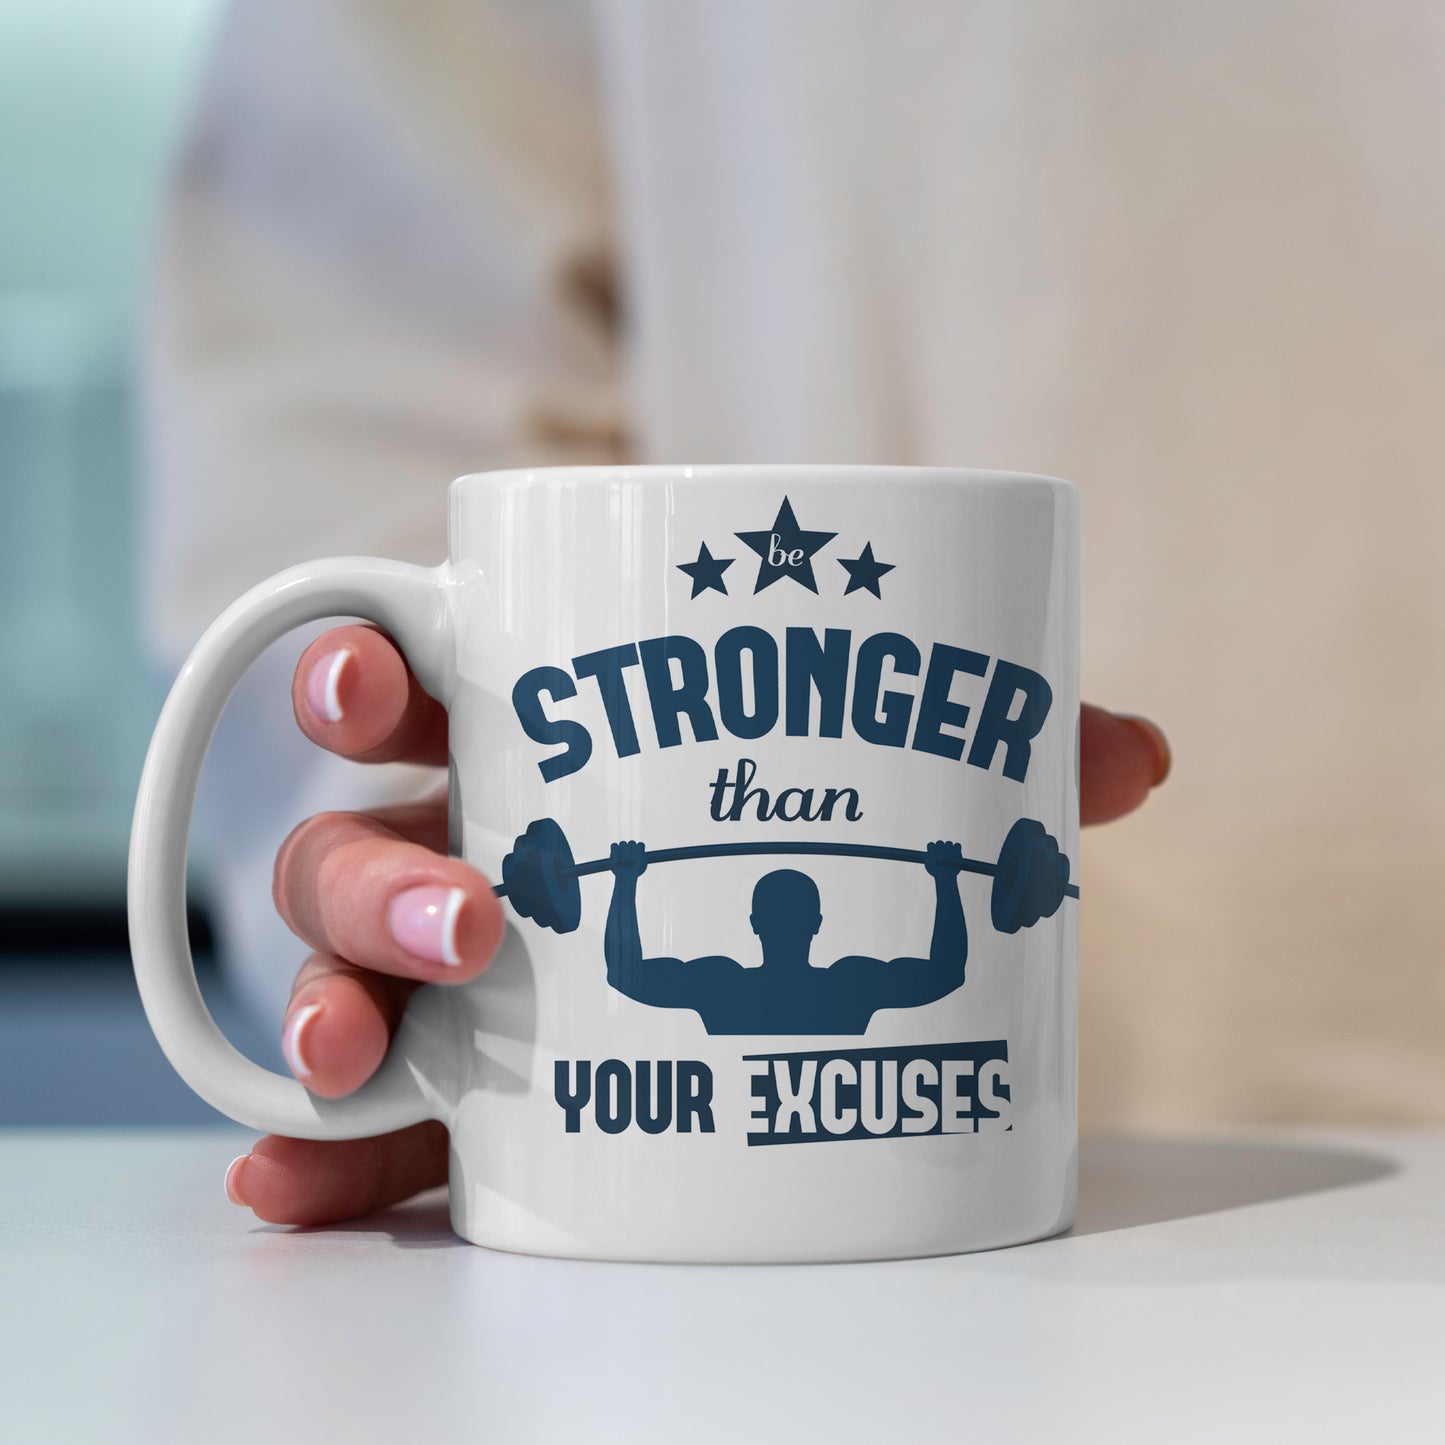 Personalized Mug(Stronger Than Your Excuses)